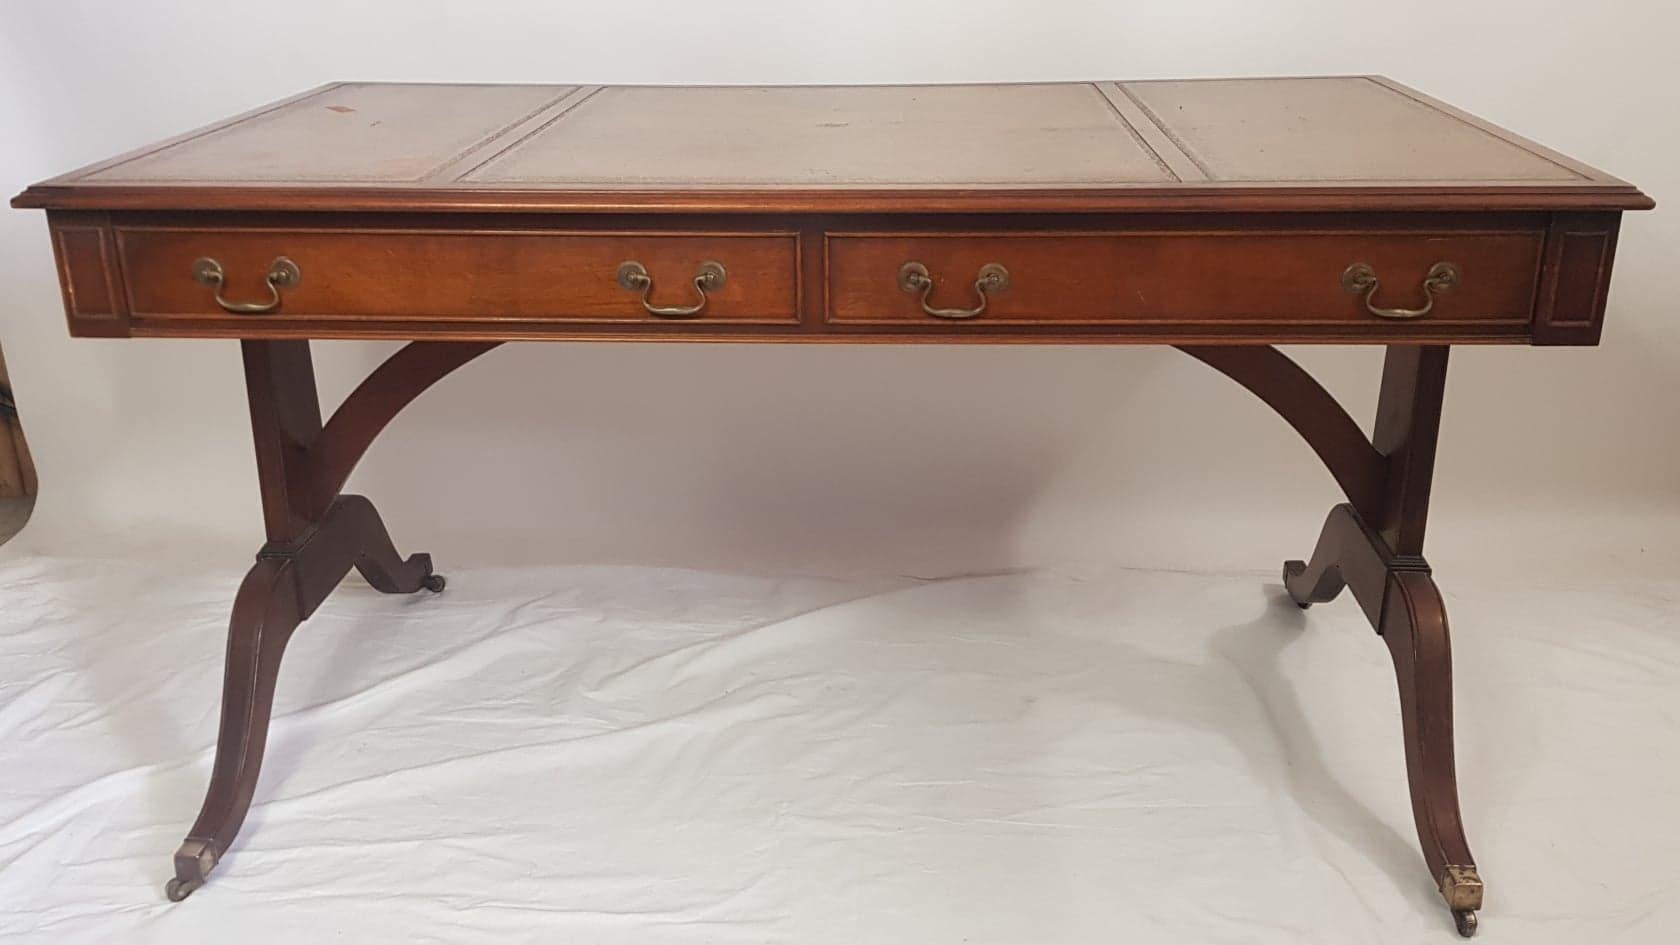 Large Georgian style mahogany writing table by Reprodux.

Having a lovely antique style tooled leather writing surface in three sections. Front opening drawers and rear dummy drawer fronts. 

Raised on twin end supports having splayed feet, with